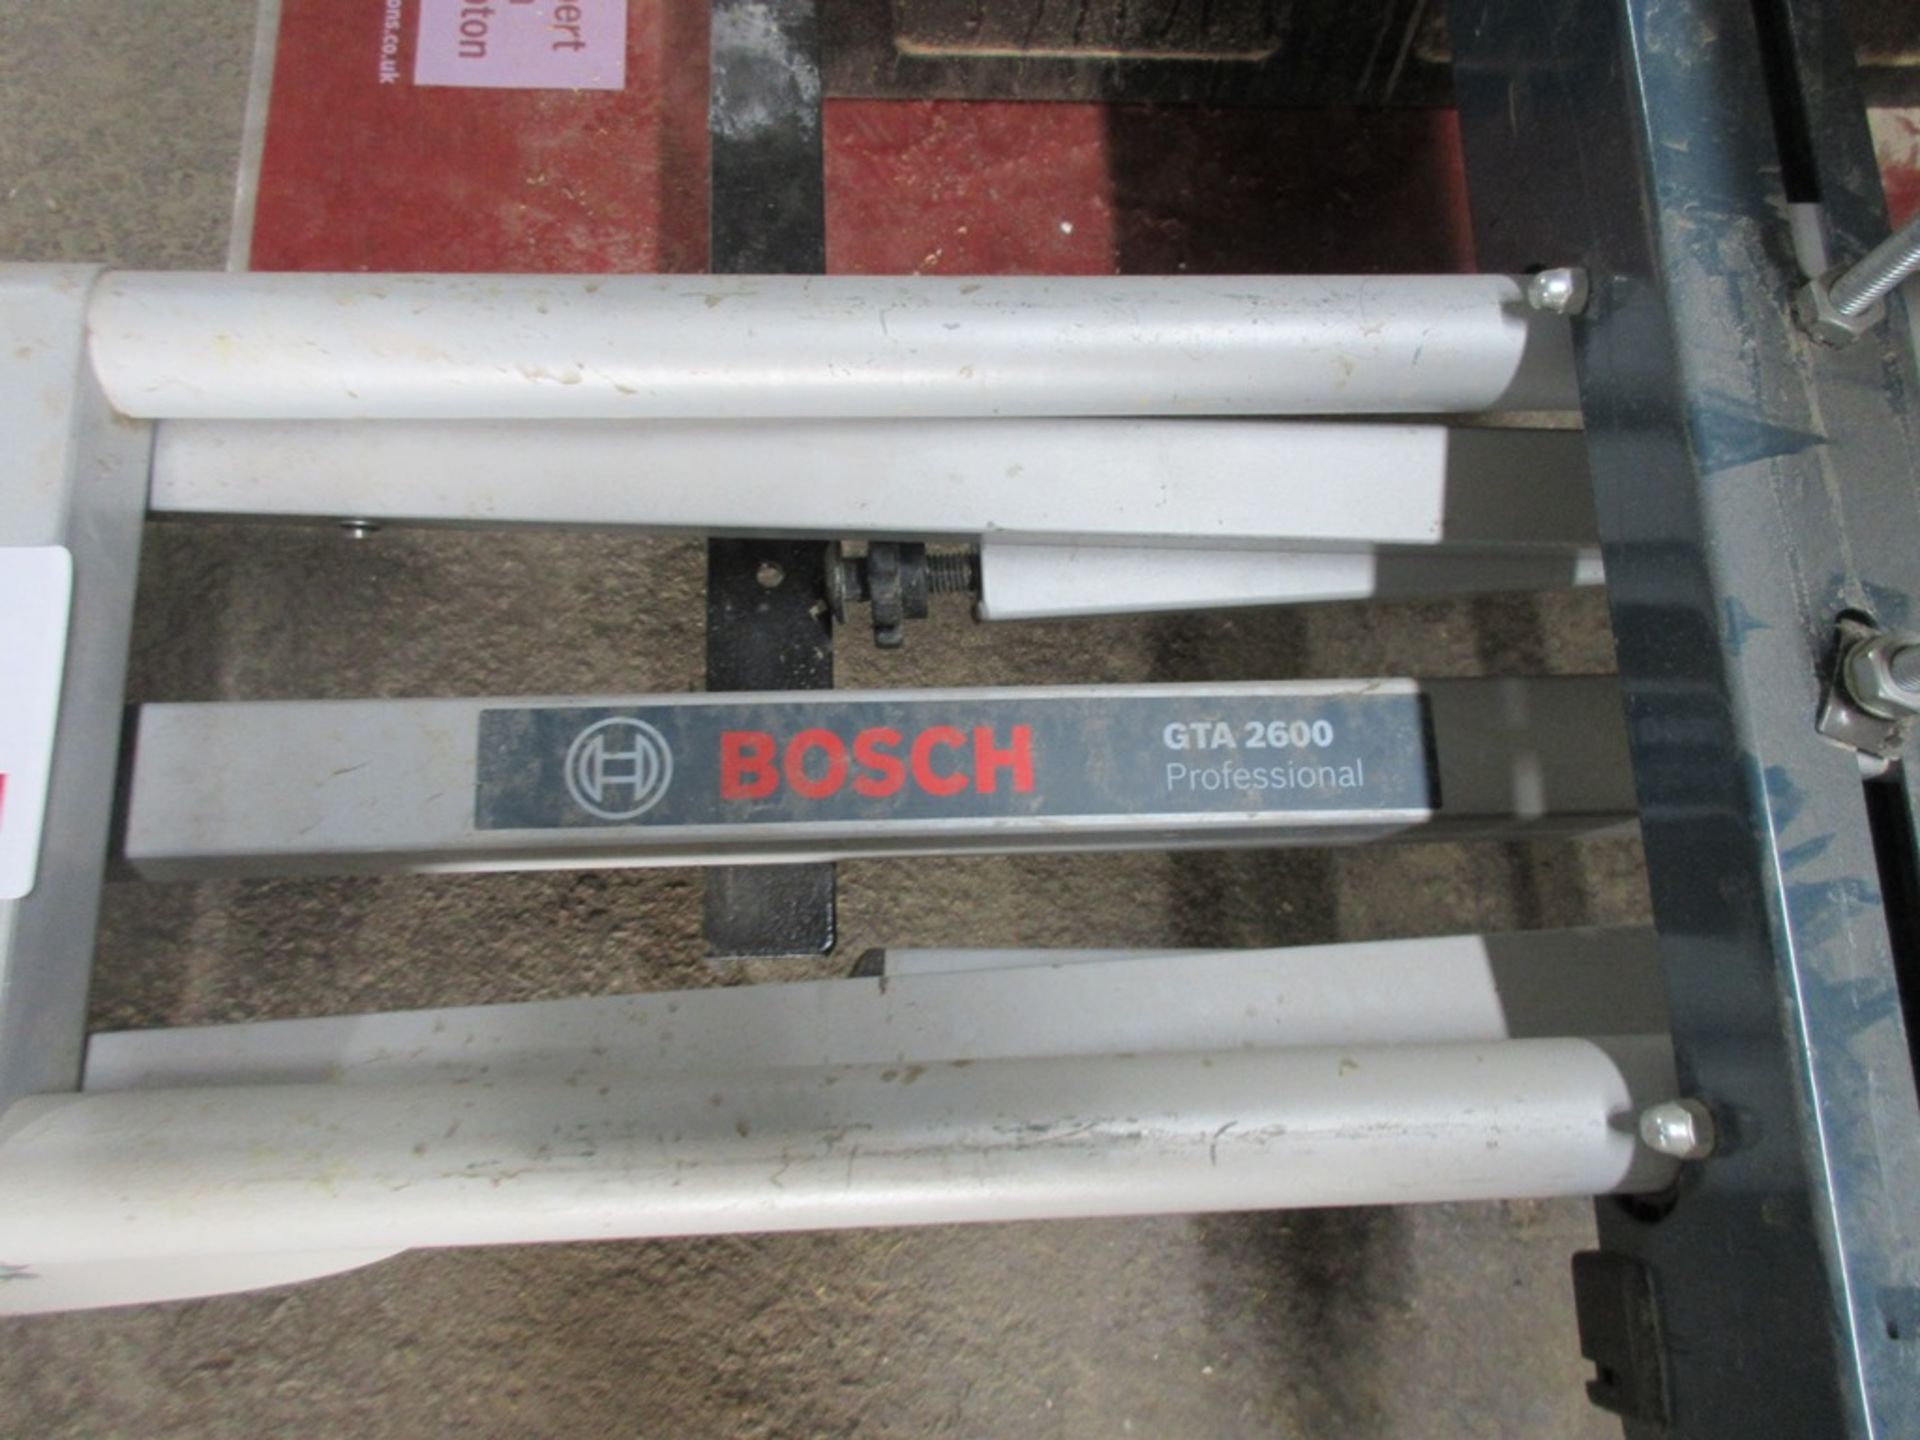 Bosch GTA 2600 Professional compound mitre saw table - Image 2 of 3